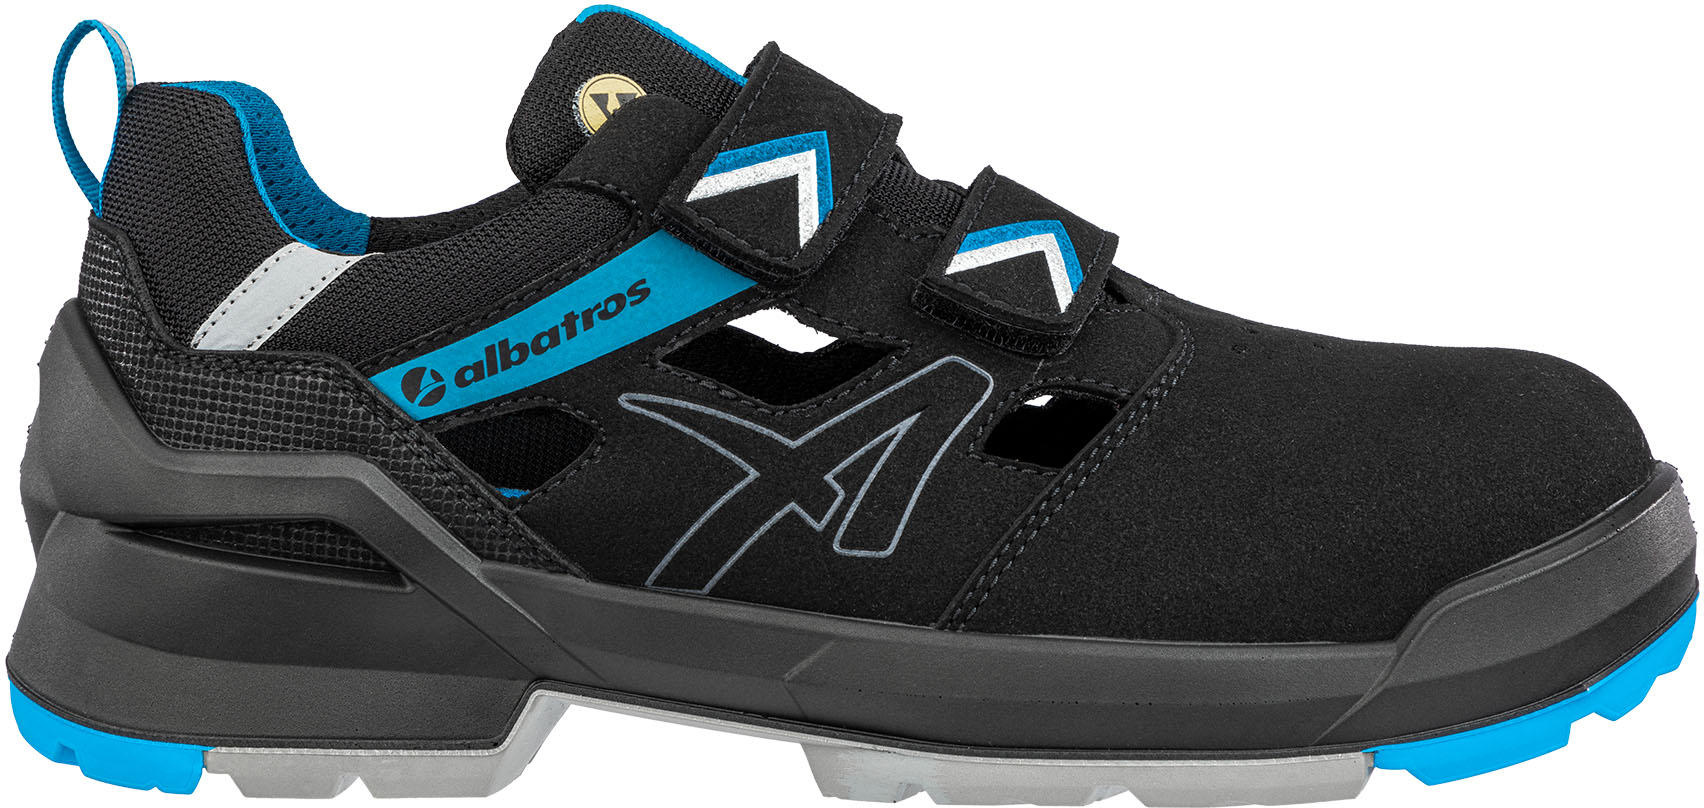 Forge Air Black/Blue Low S1 ESD